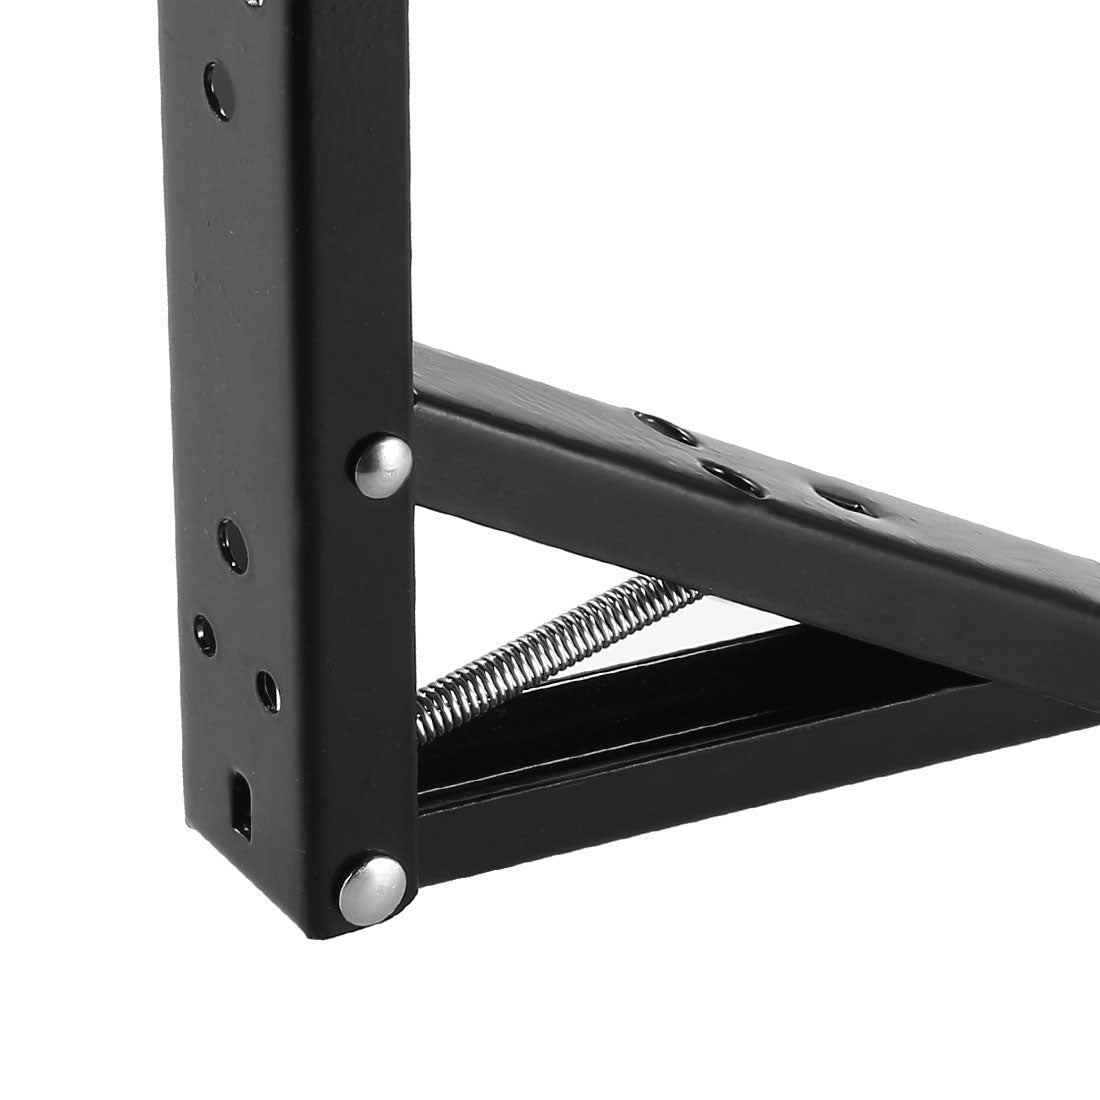 uxcell Uxcell Folding Bracket 11.6 inch 295mm for Shelves Table Desk Wall Mounted Support Collapsible Long Release Arm Space Saving Carbon Steel